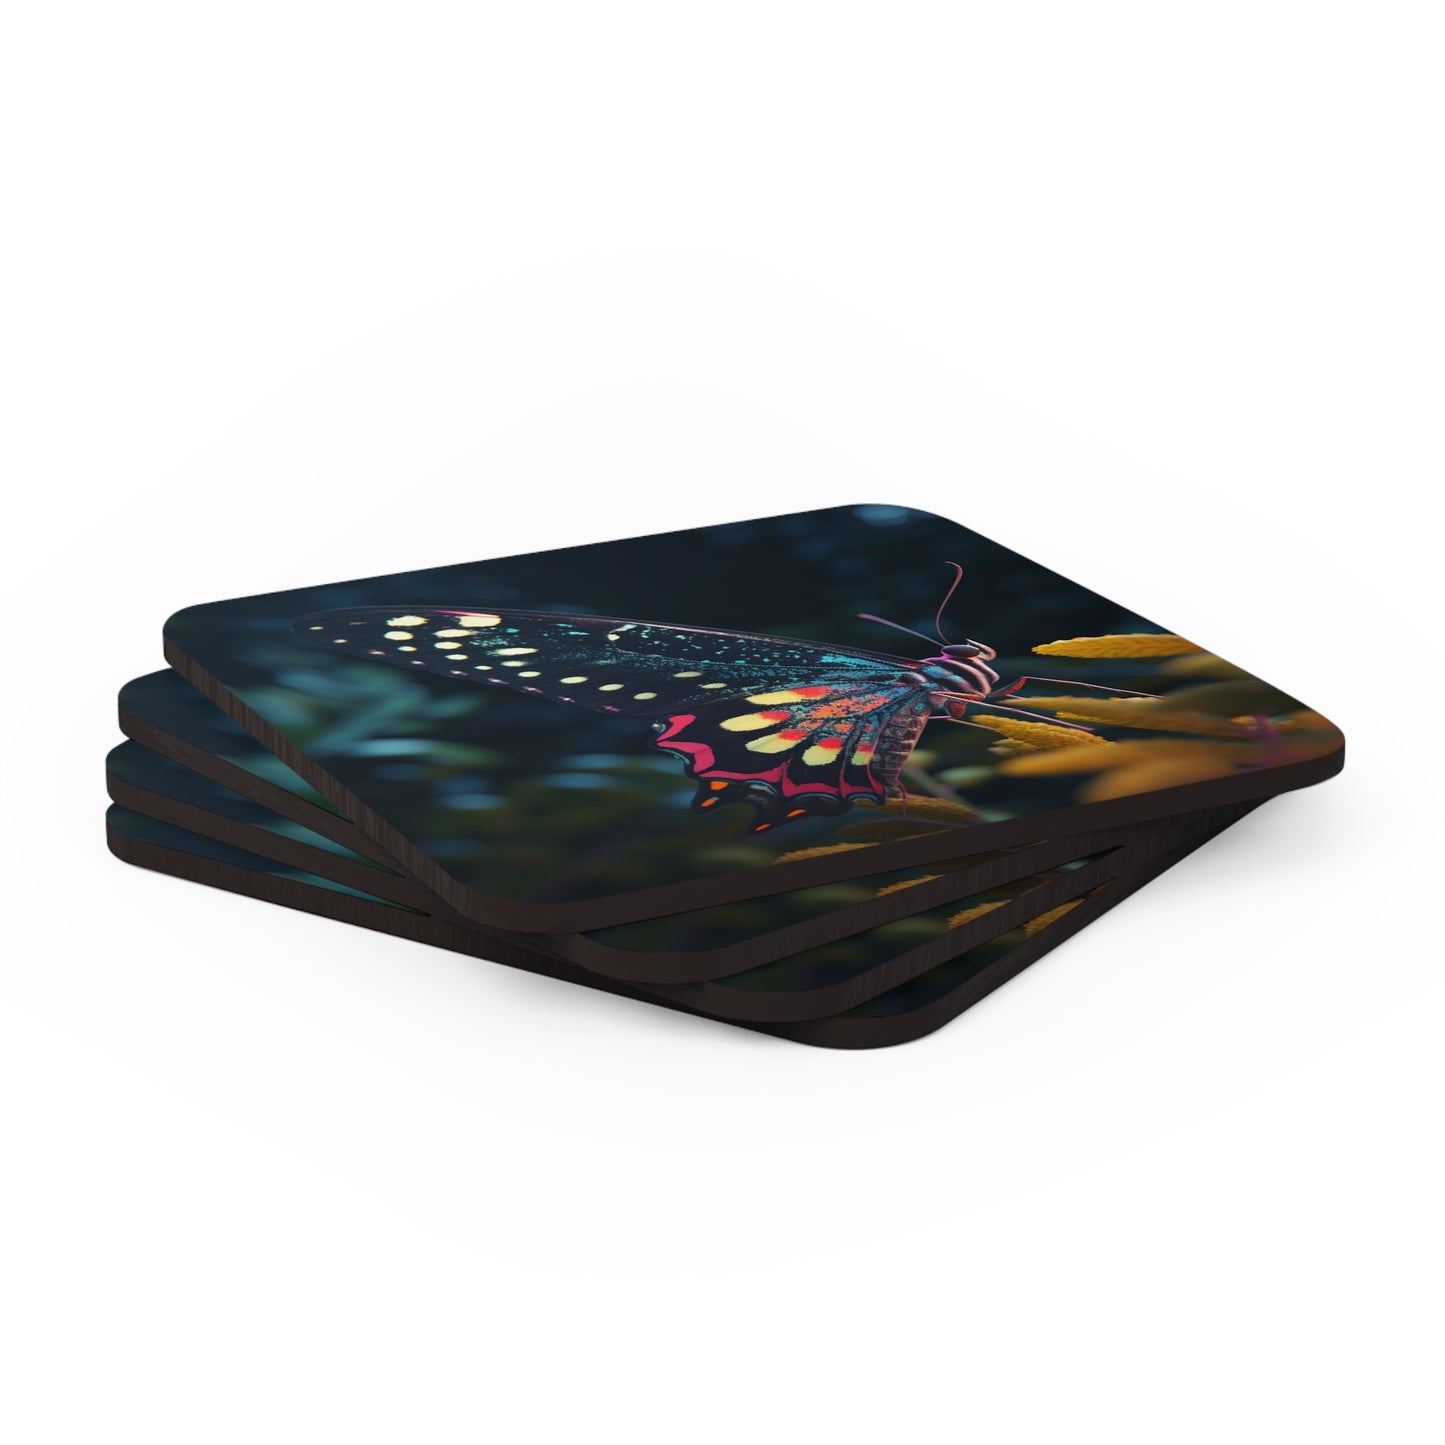 Corkwood Coaster Set Hyper Colorful Butterfly Macro 2